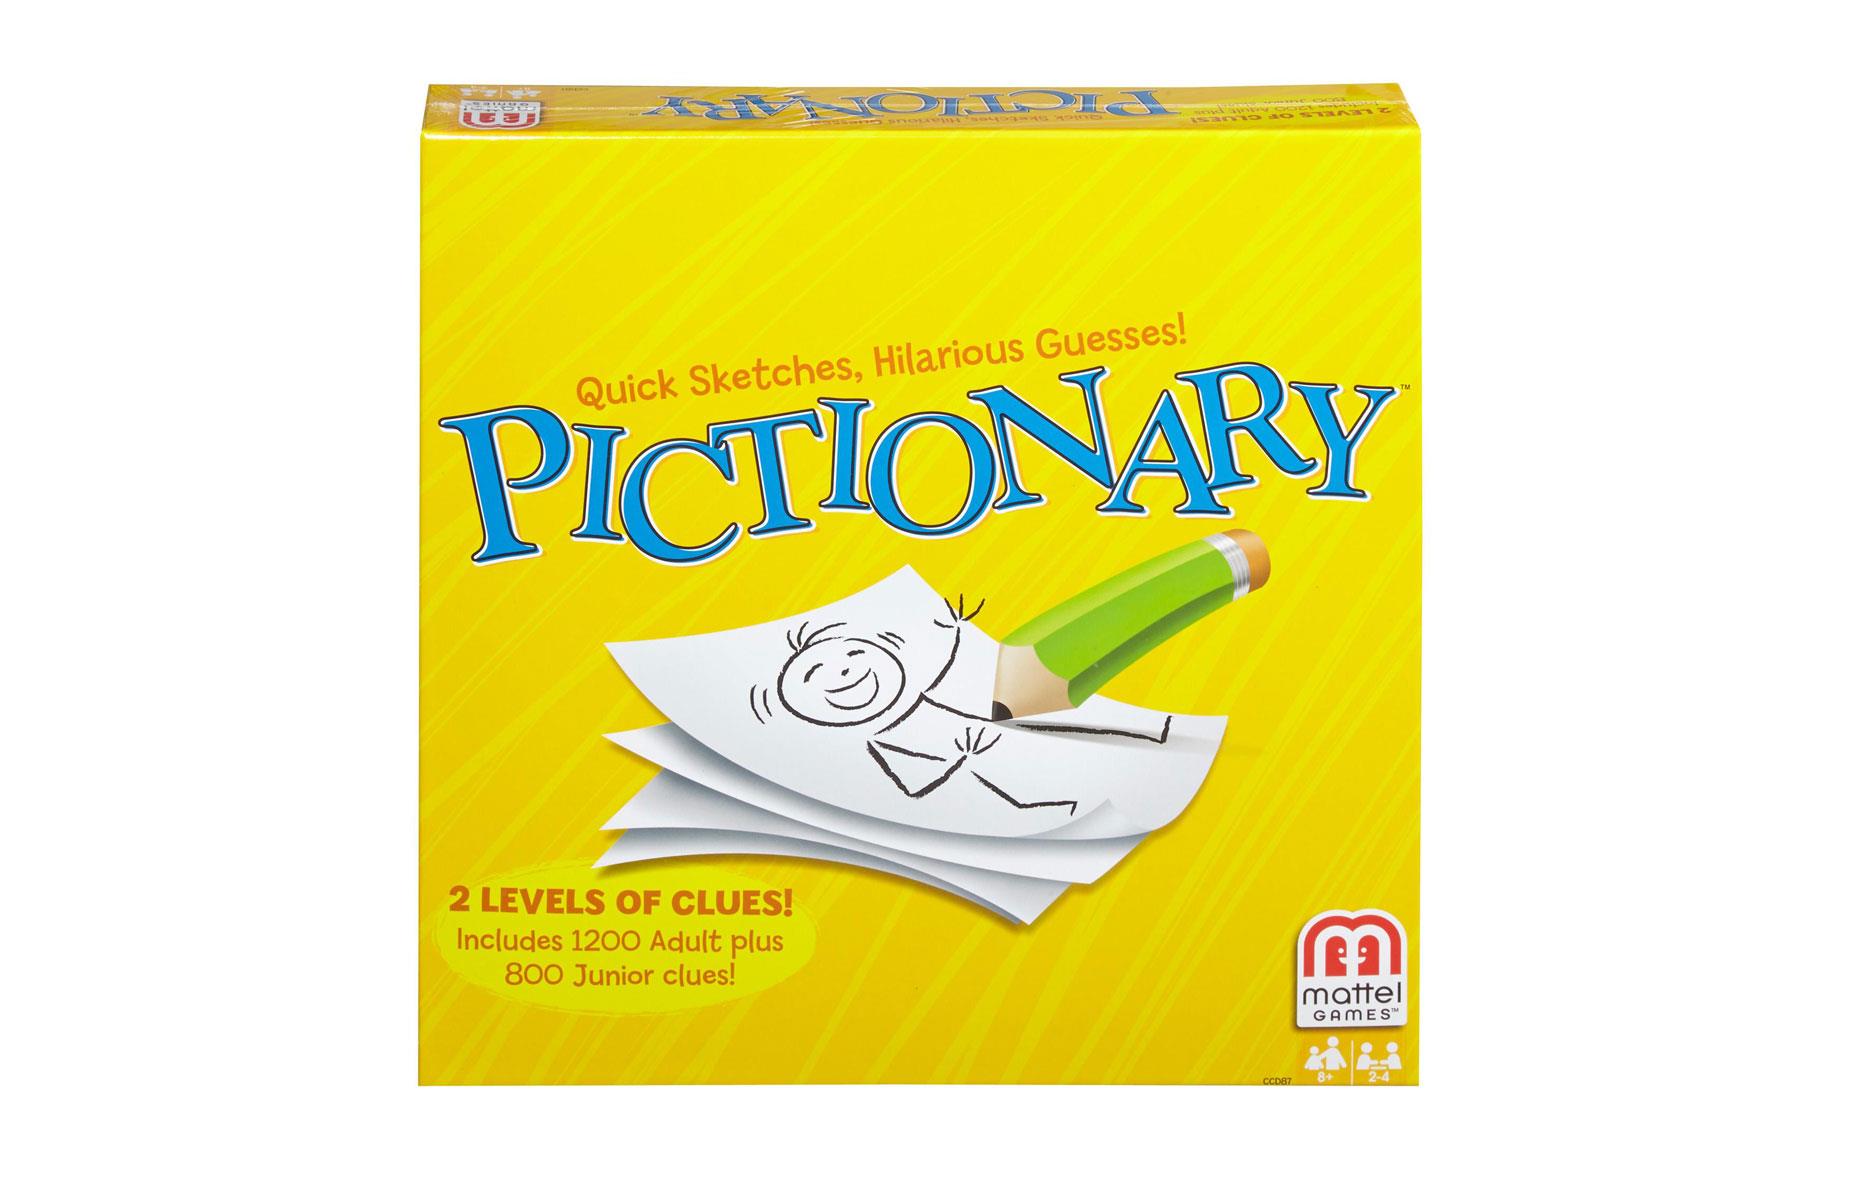 Pictionary – use your imagination